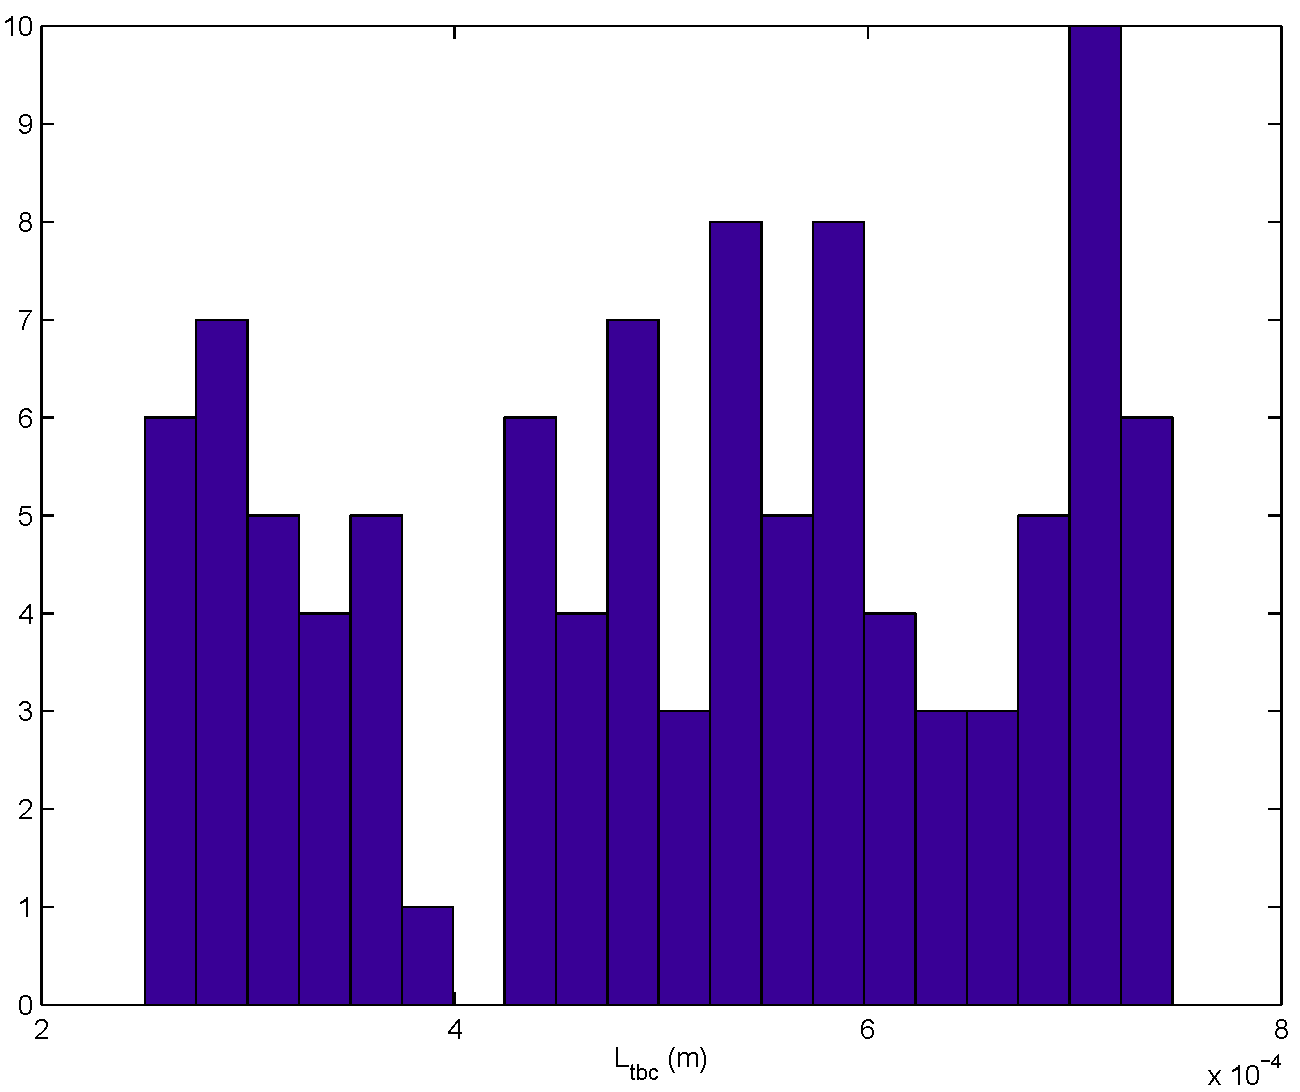 The figure is a histogram of a random sample from a uniformly-distributed LTBC for a sample size of N=100.